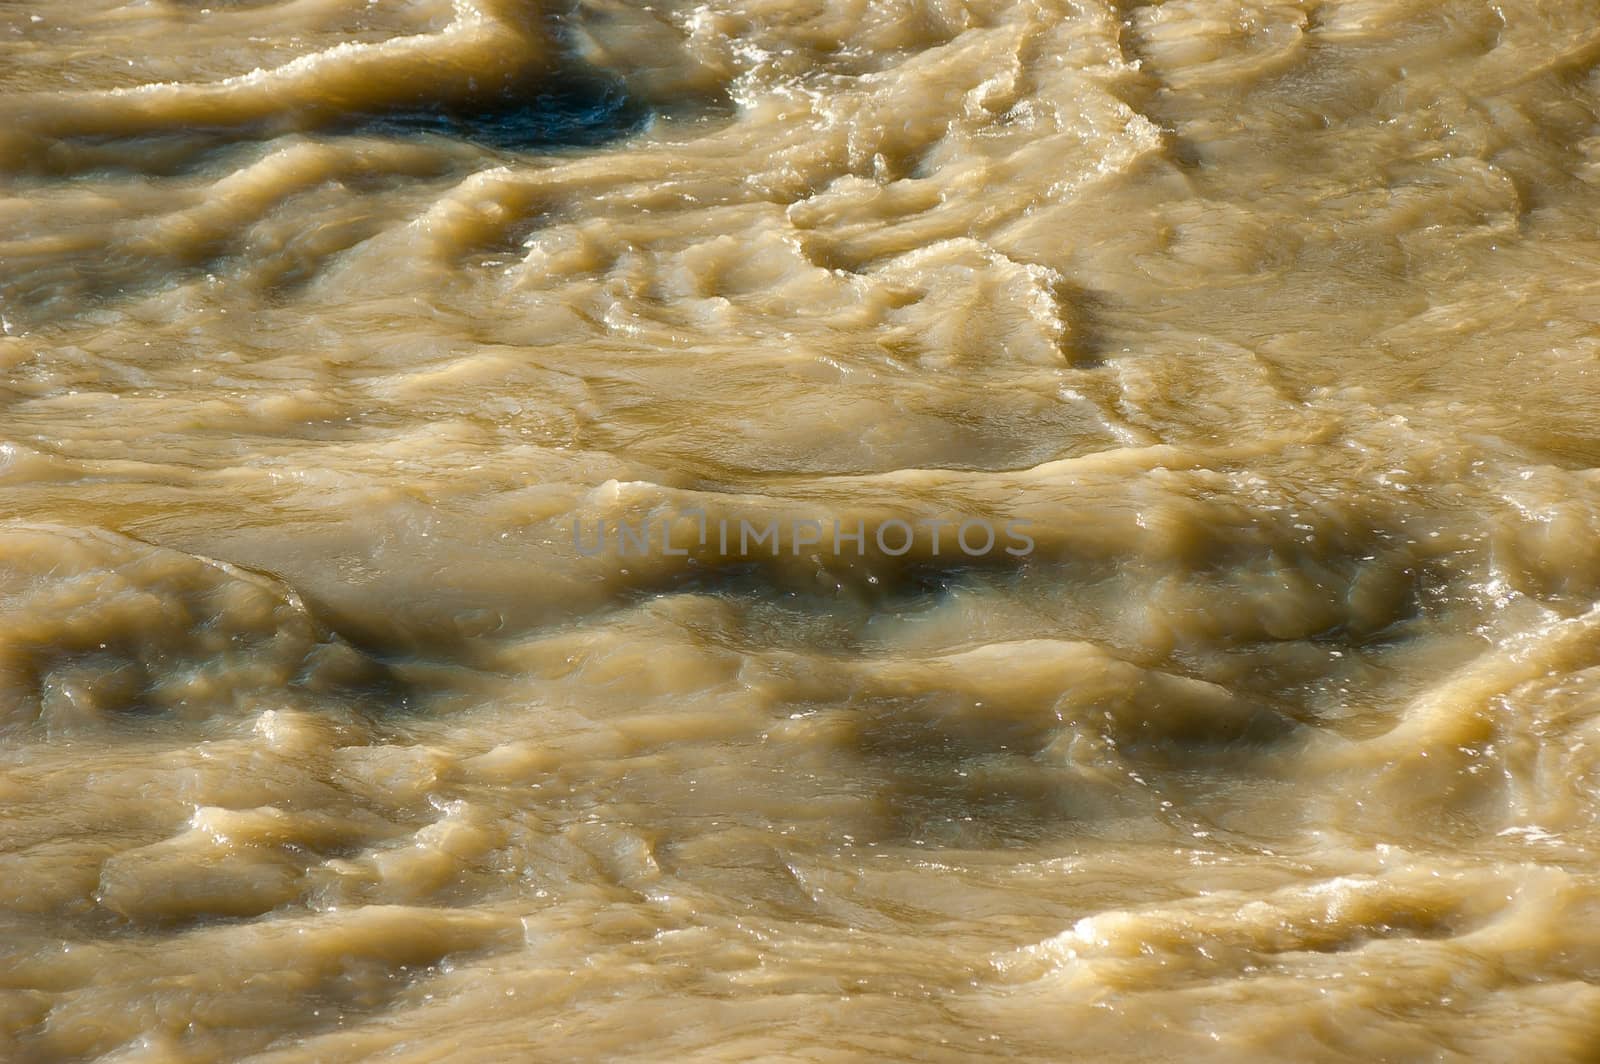 Muddy water flowing in the river after a rain storm